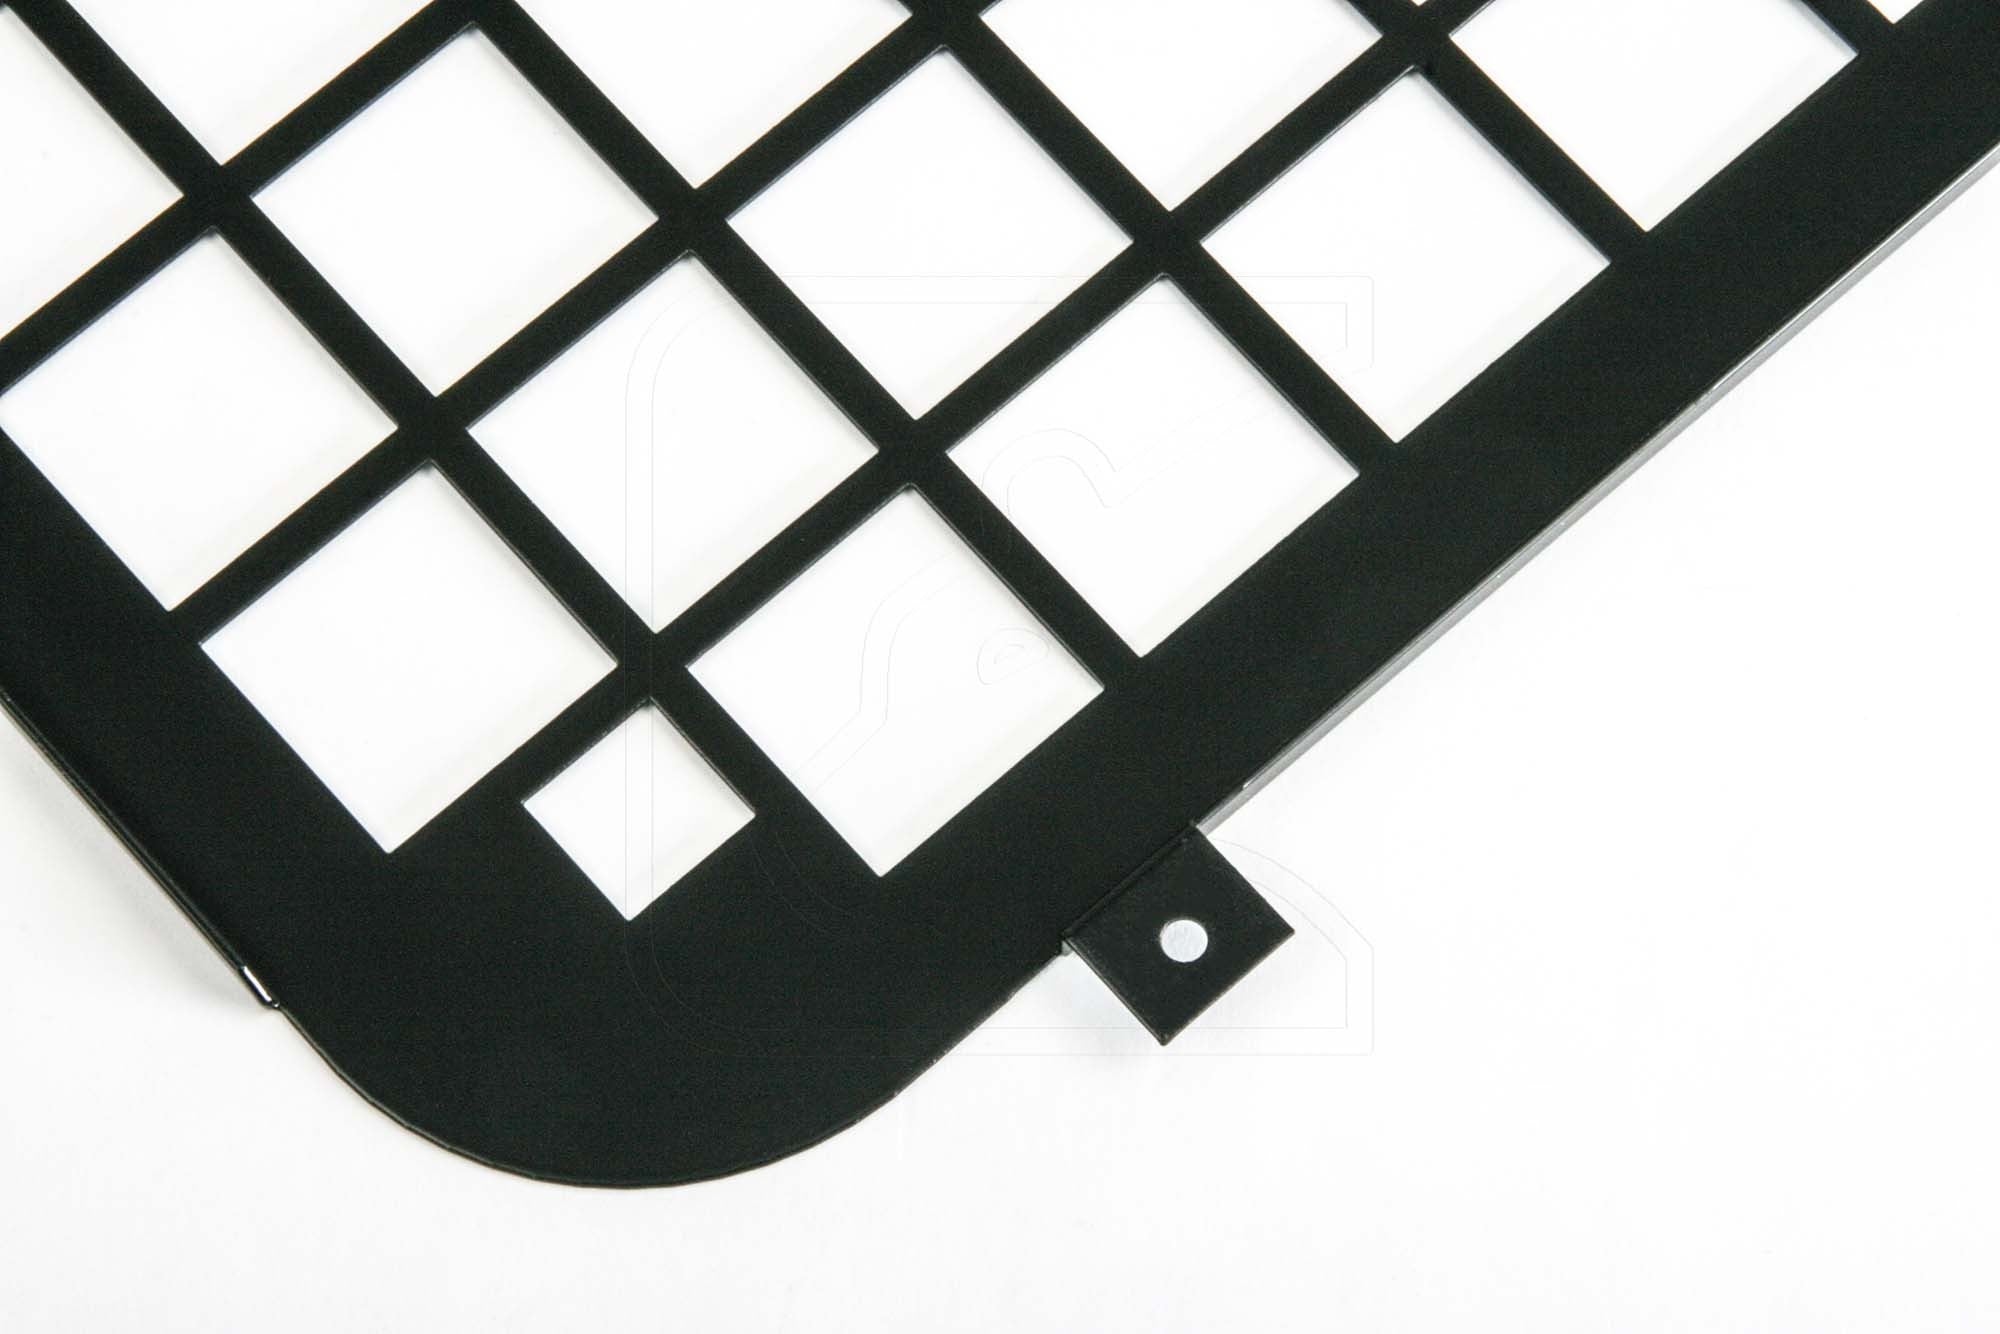 Station Wagon Window Grille - for Land Rover Defender 90/110 (sold individually) [***6-8 WEEK LEAD-TIME***]